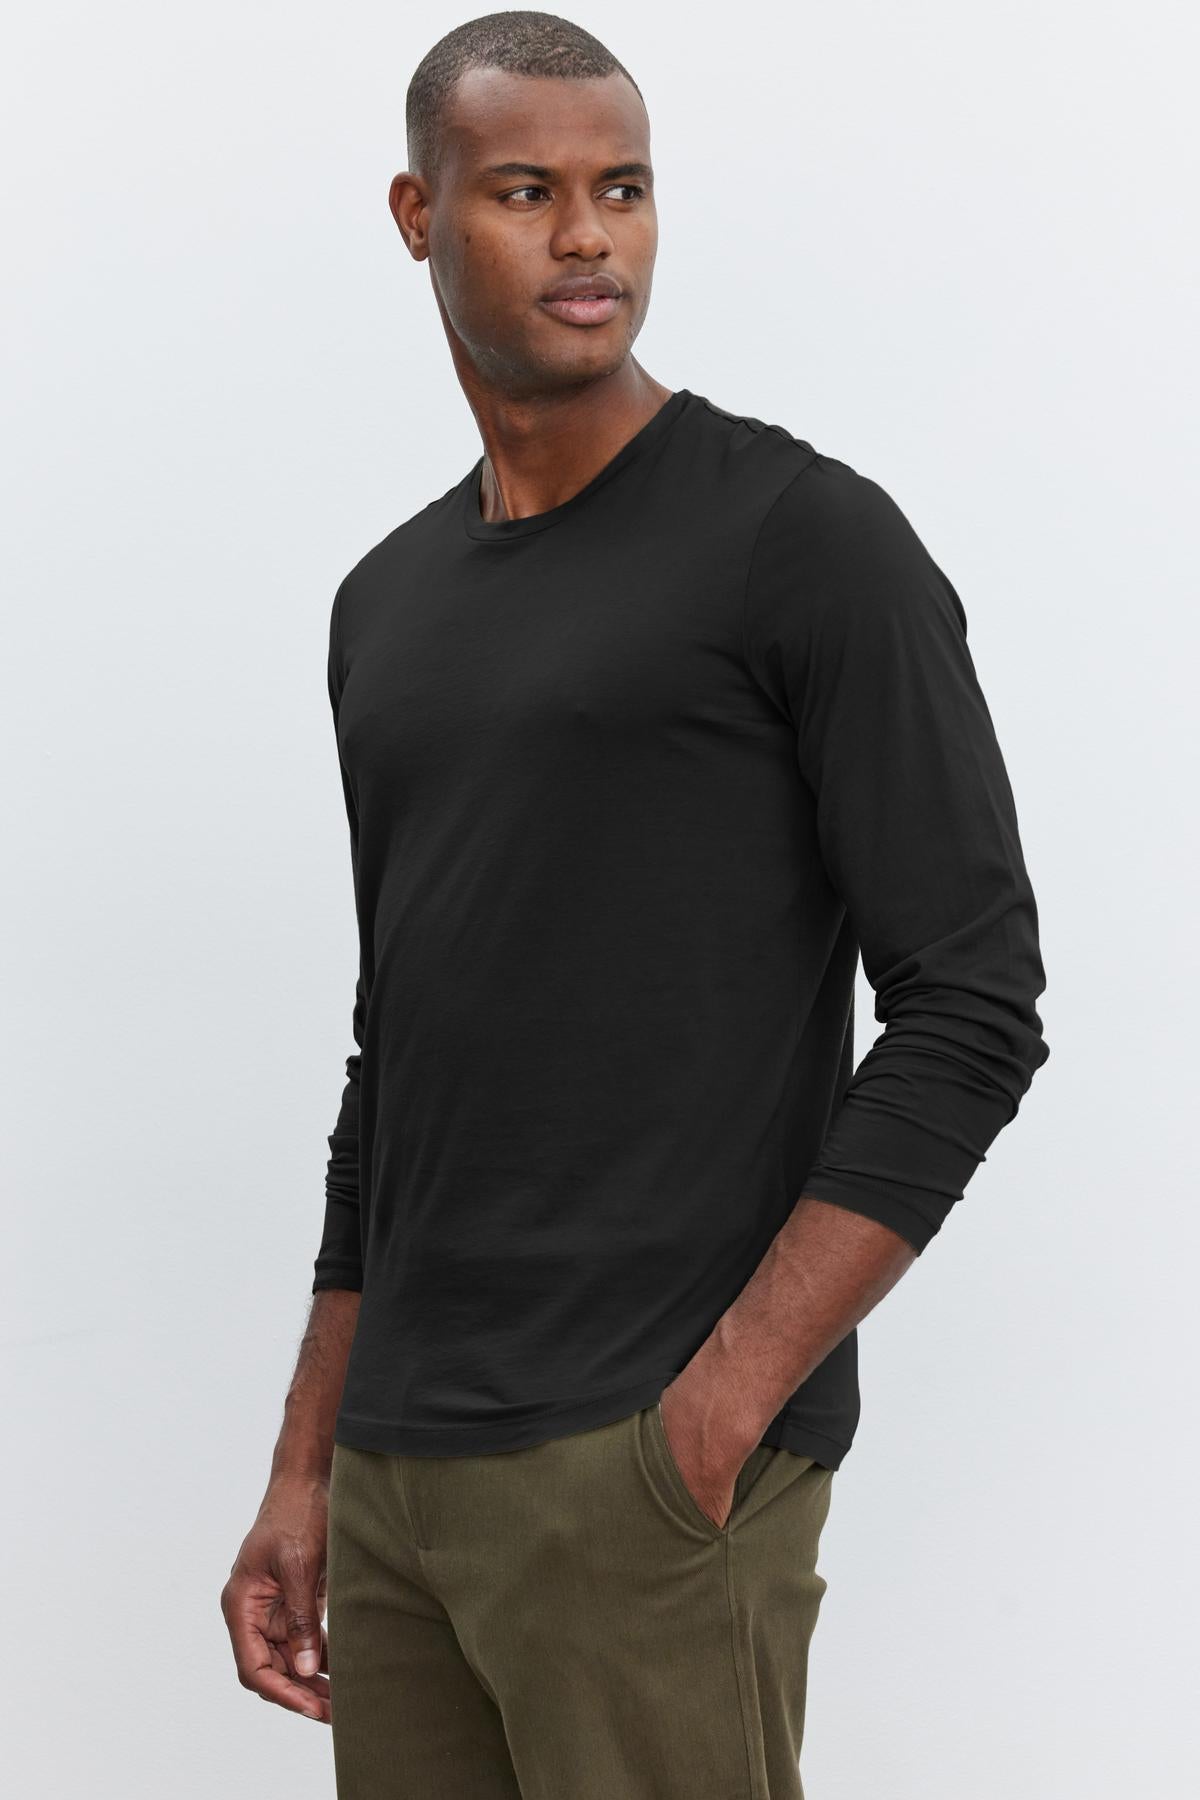 A man in a SKEETER WHISPER CLASSIC CREW NECK TEE by Velvet by Graham & Spencer and olive pants stands against a plain background, looking to the side.-36342439248065